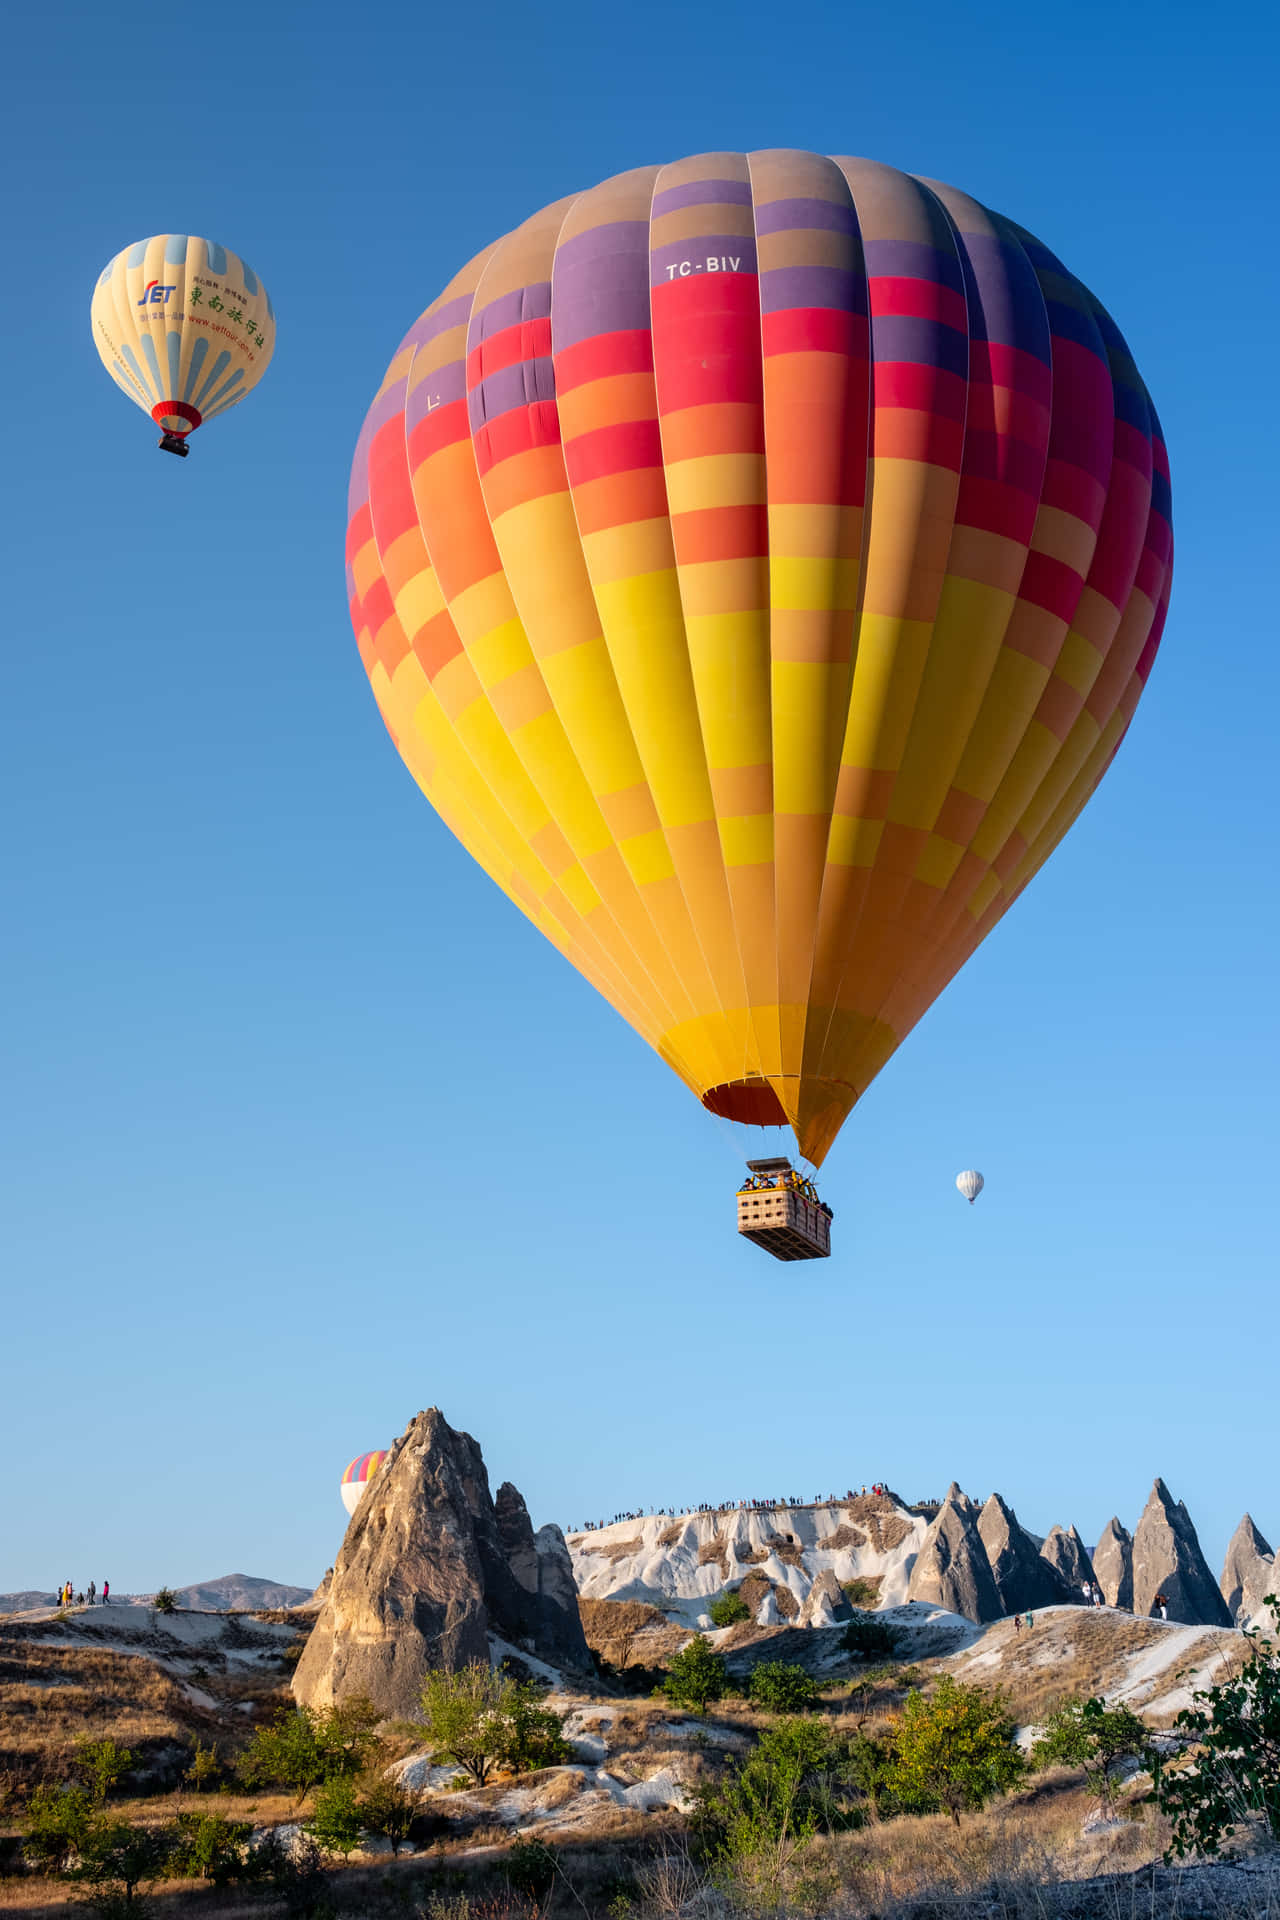 Enjoy the scenic view of hot air balloons in the sky